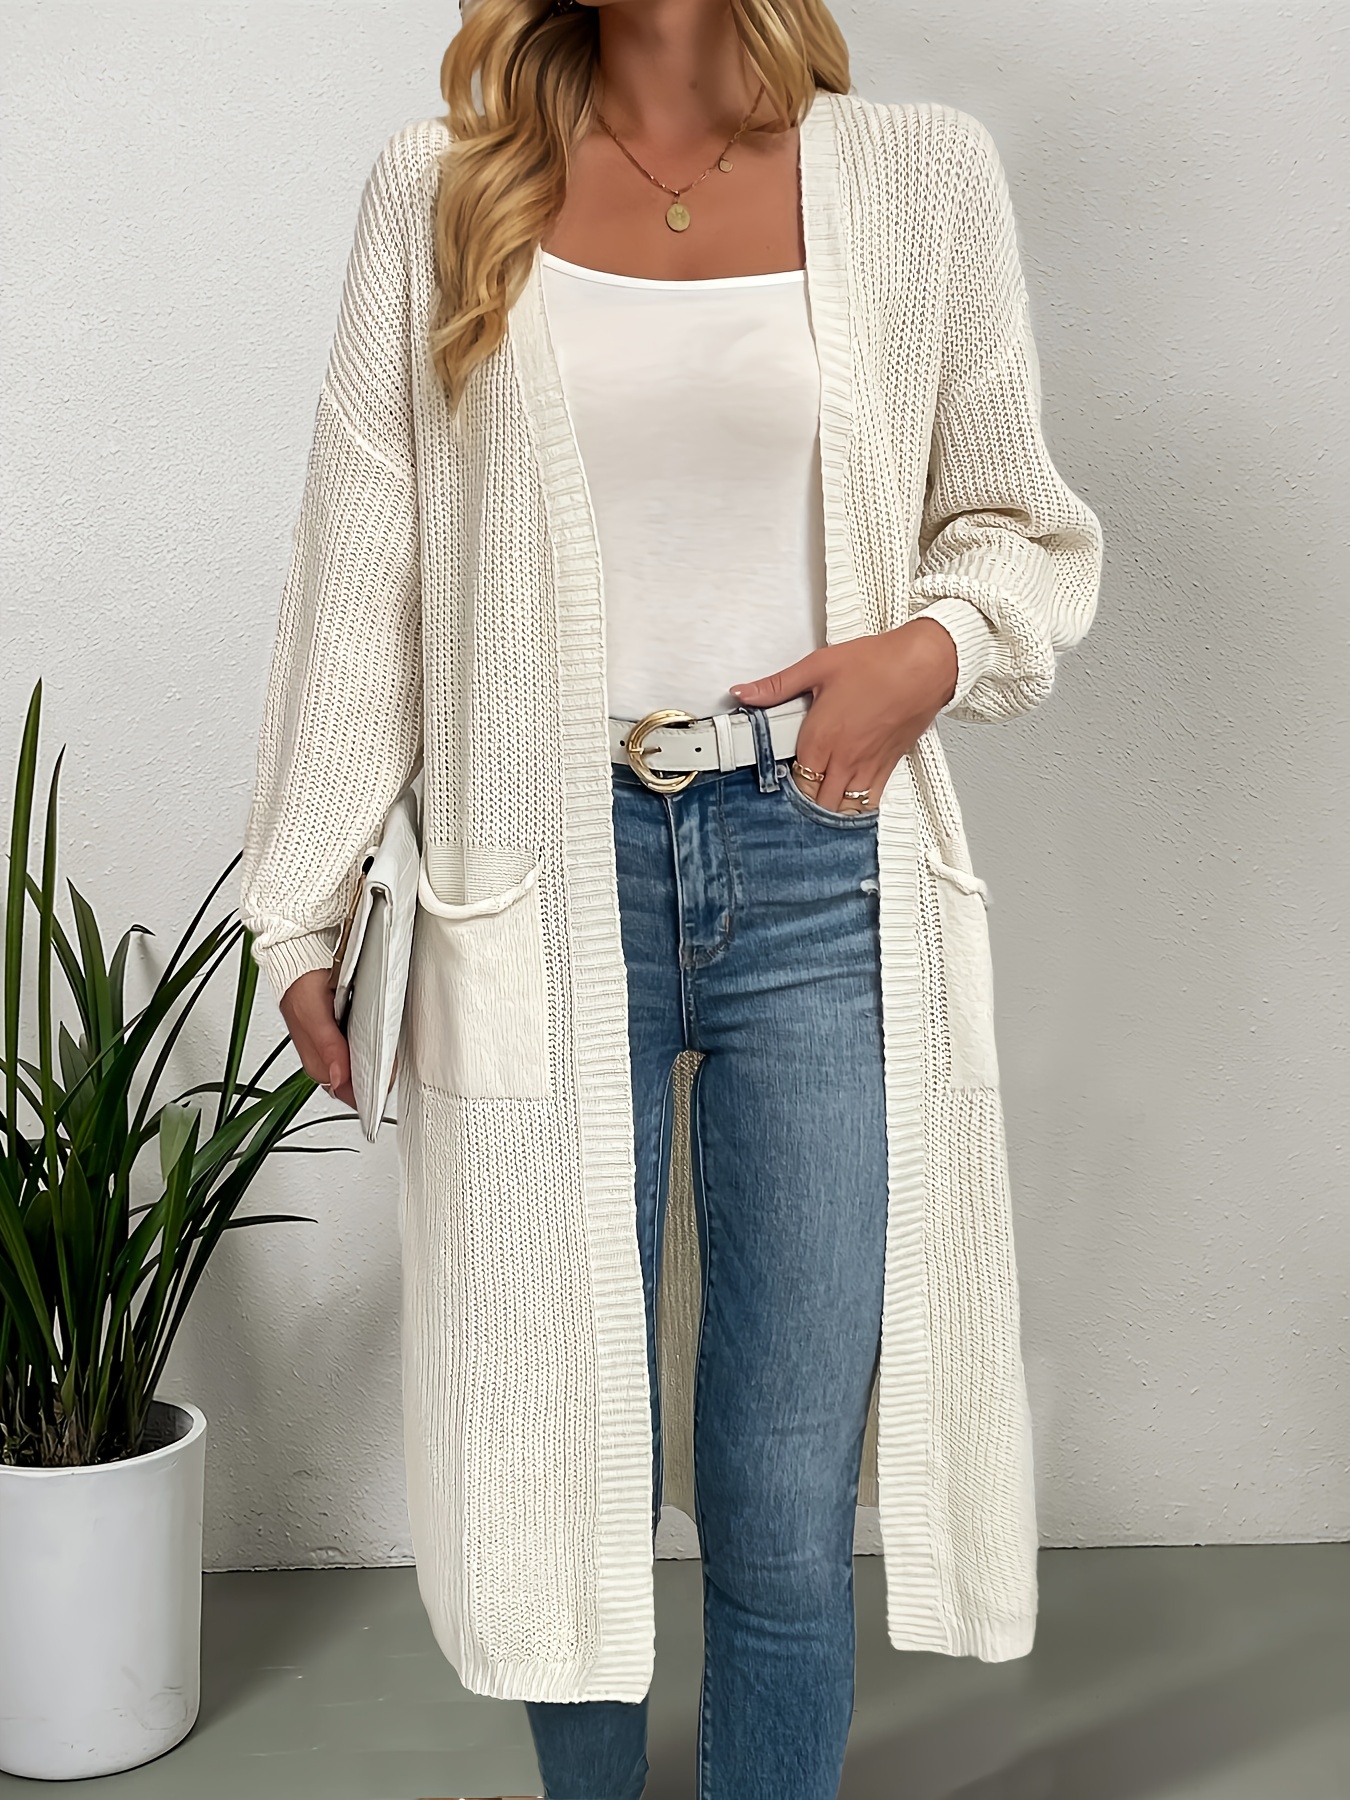 tuduoms Womens Maxi Long Cable Knit Duster Oversized Long Cardigan Sweaters  Soft Lightweight Drape Knit Pocketed Sweater Coat at  Women's  Clothing store